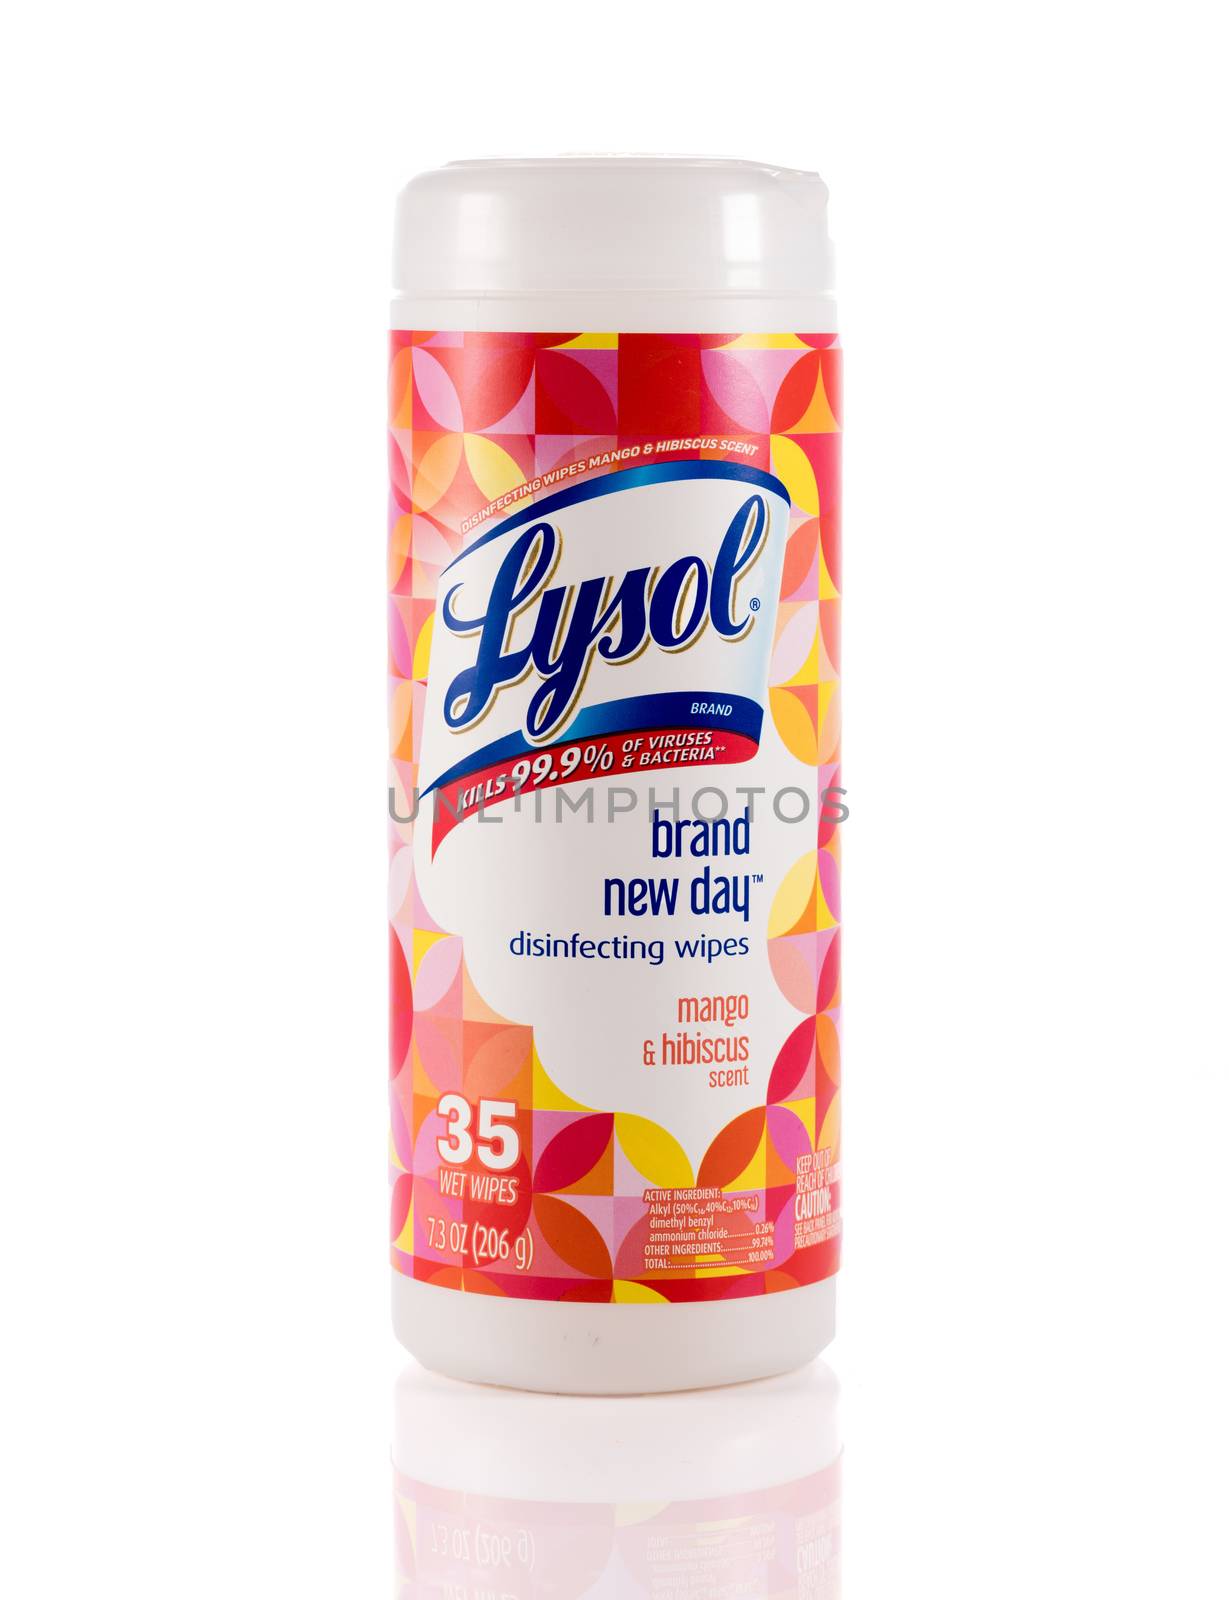 Lysol disinfecting wipes canister isolated against white background by steheap